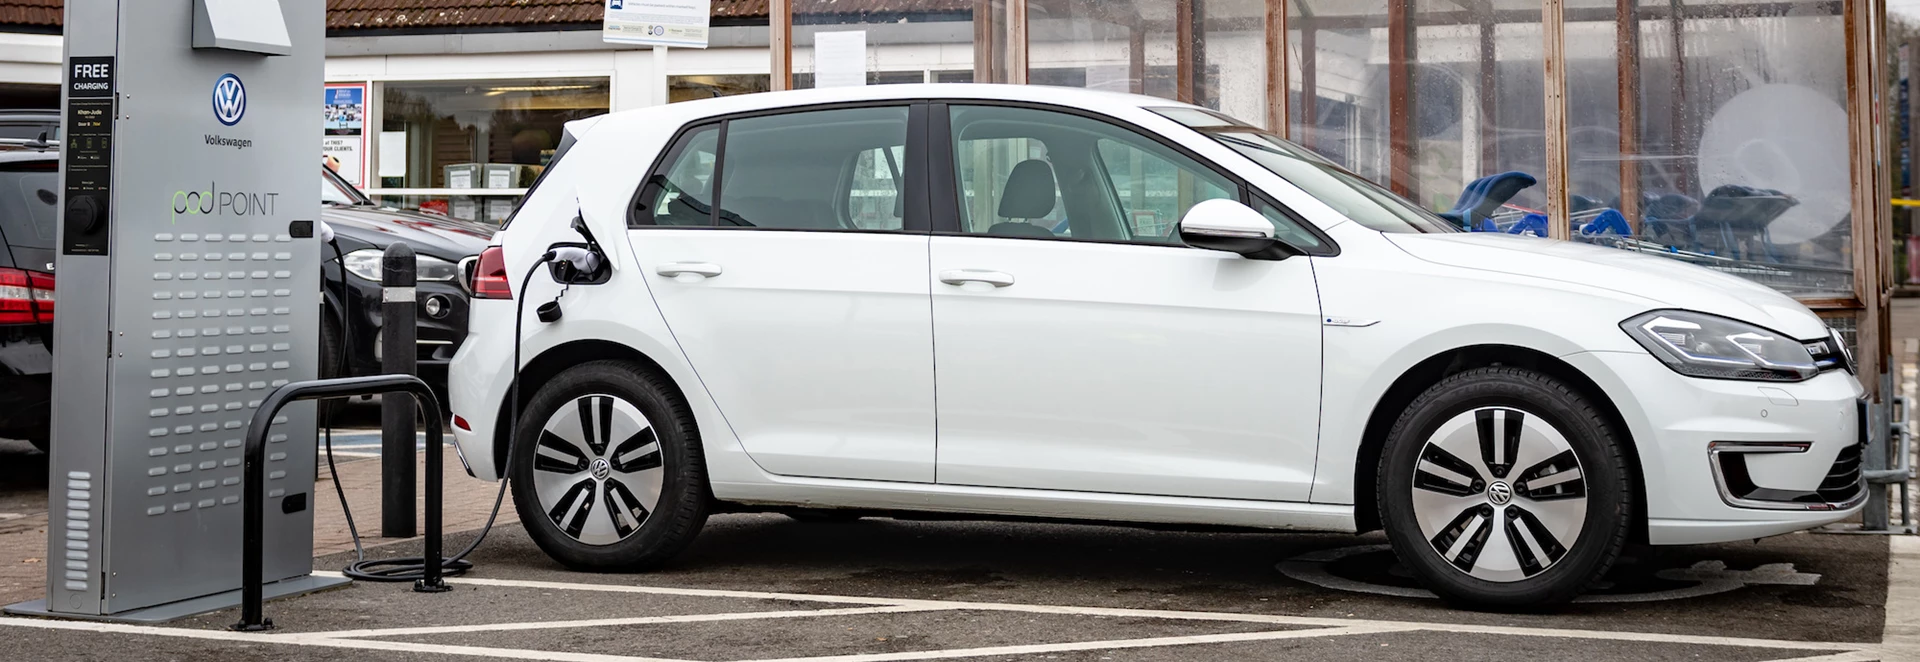 Volkswagen teams up with Tesco for UK’s largest retail charging network